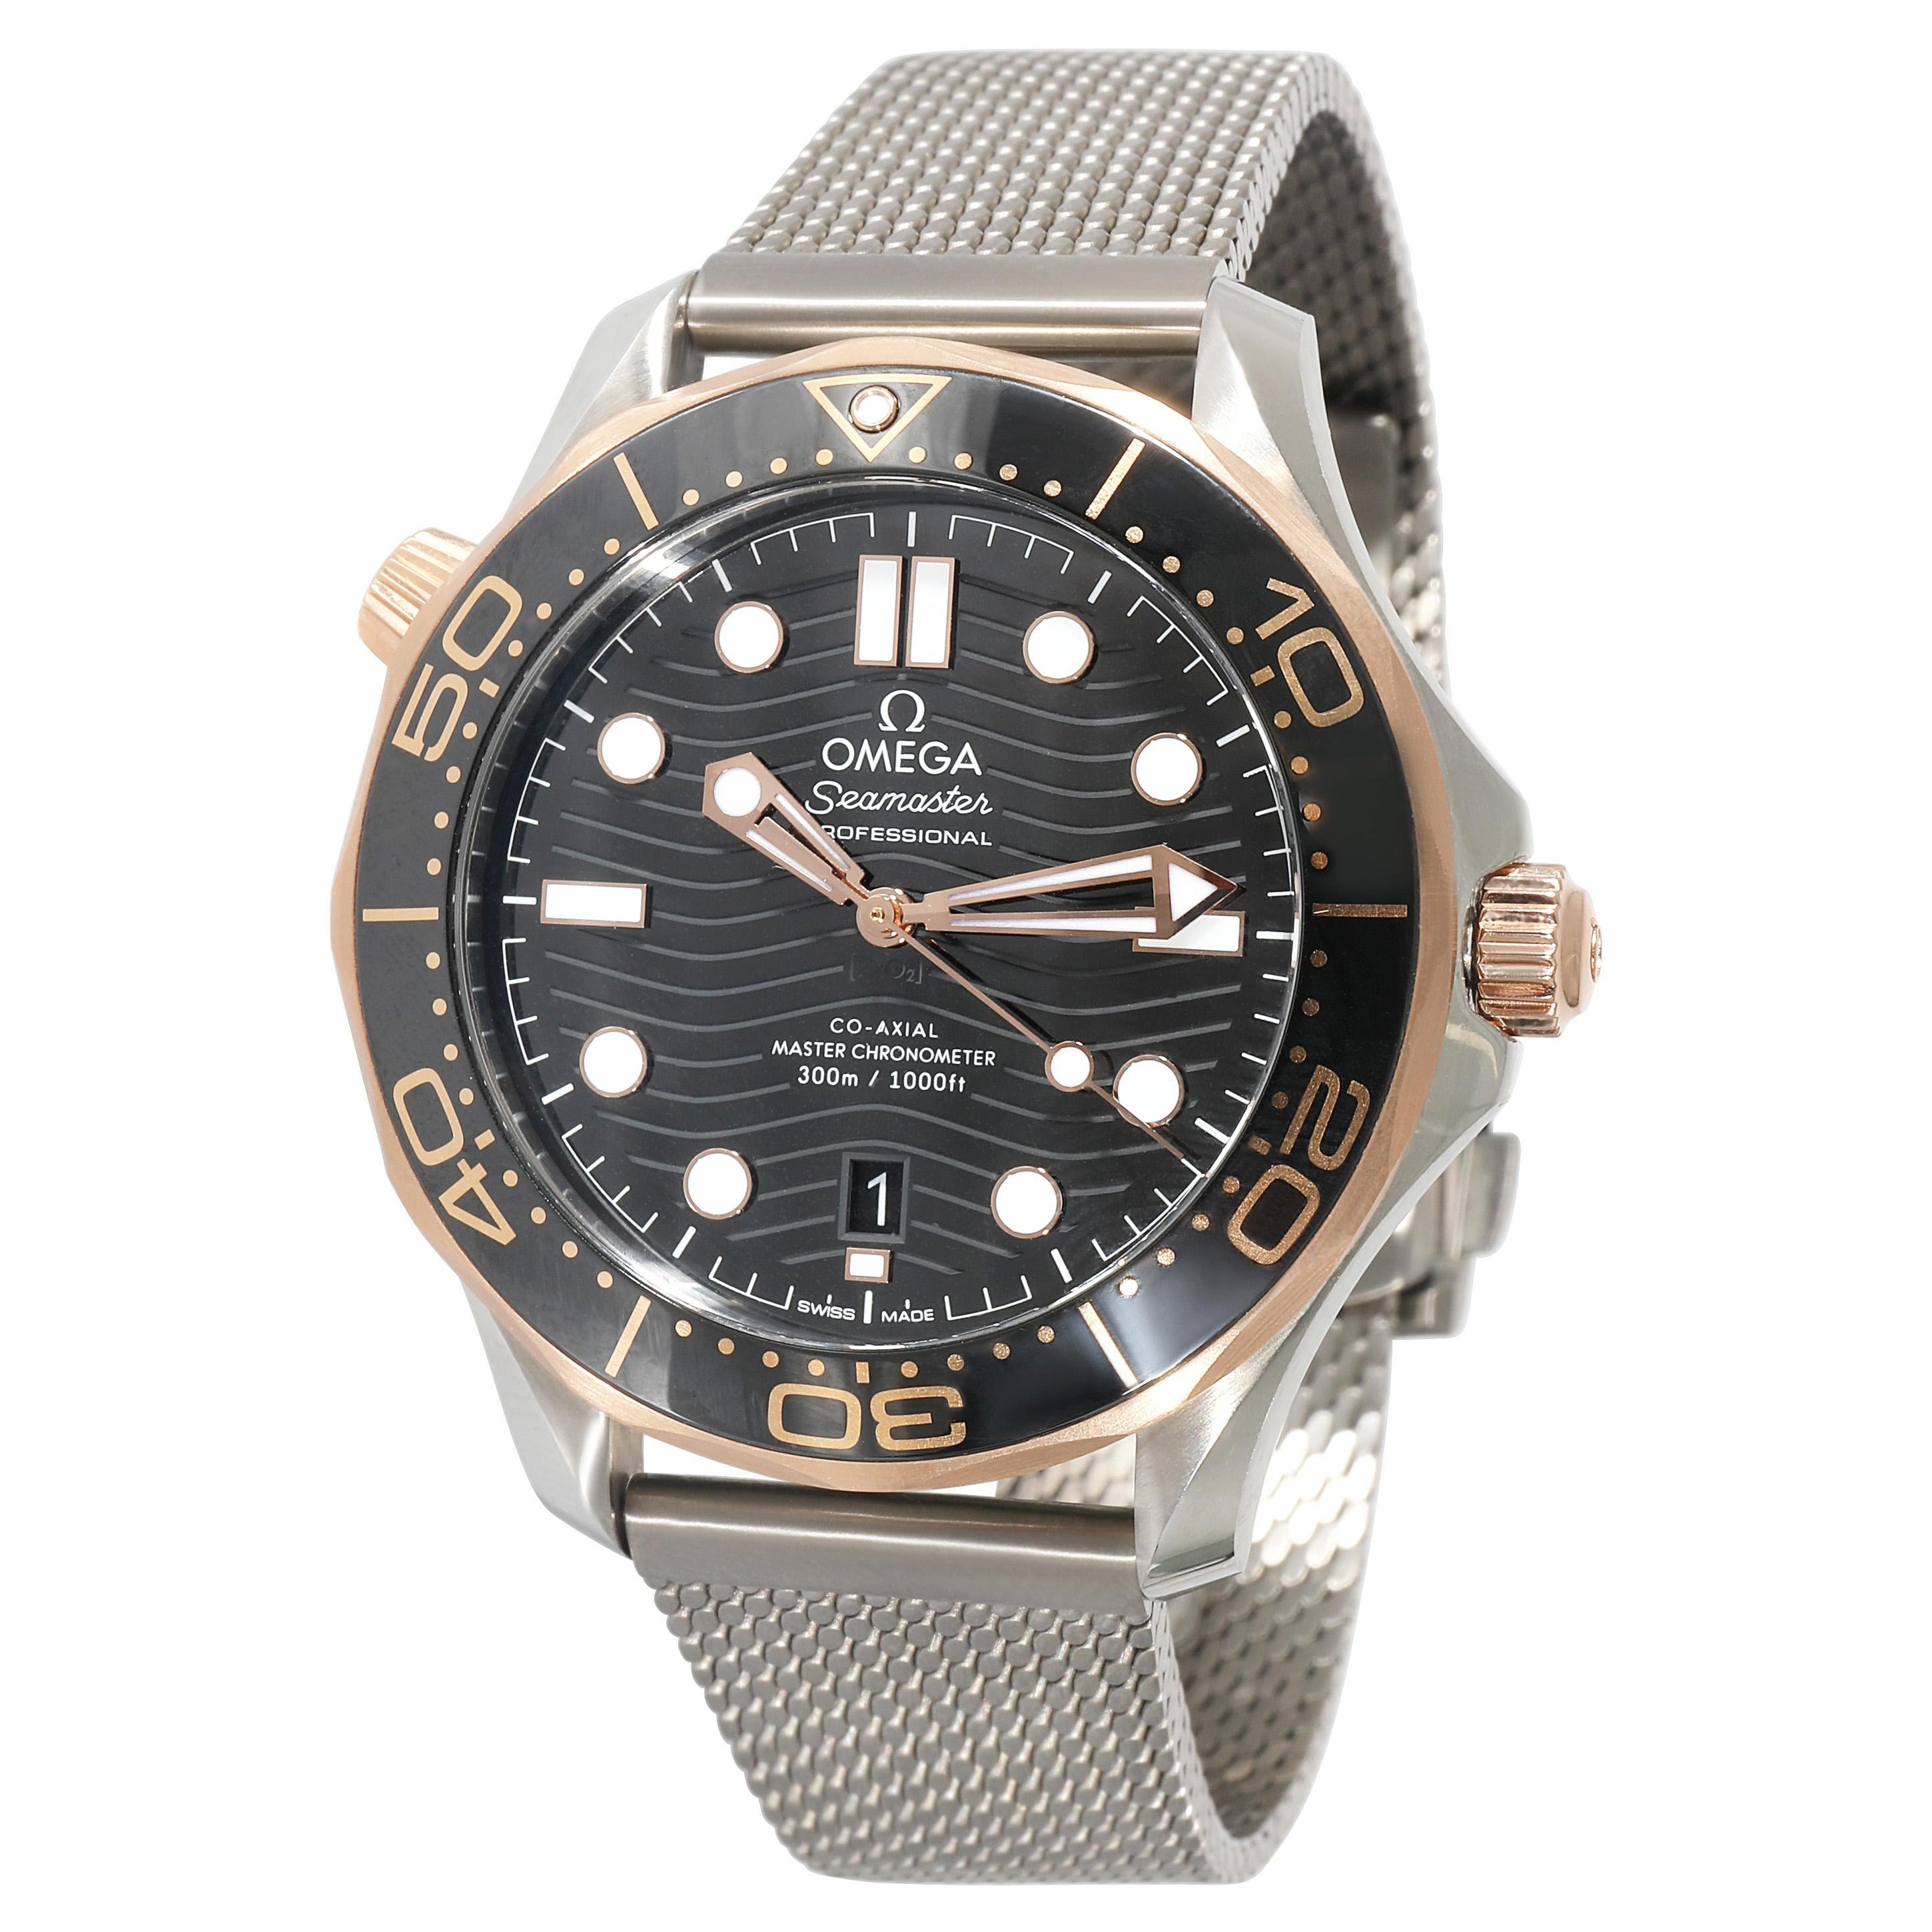 Omega Seamaster Diver 300M 210.22.42.20.01.002 Men's Watch in 18kt Stainless Ste For Sale